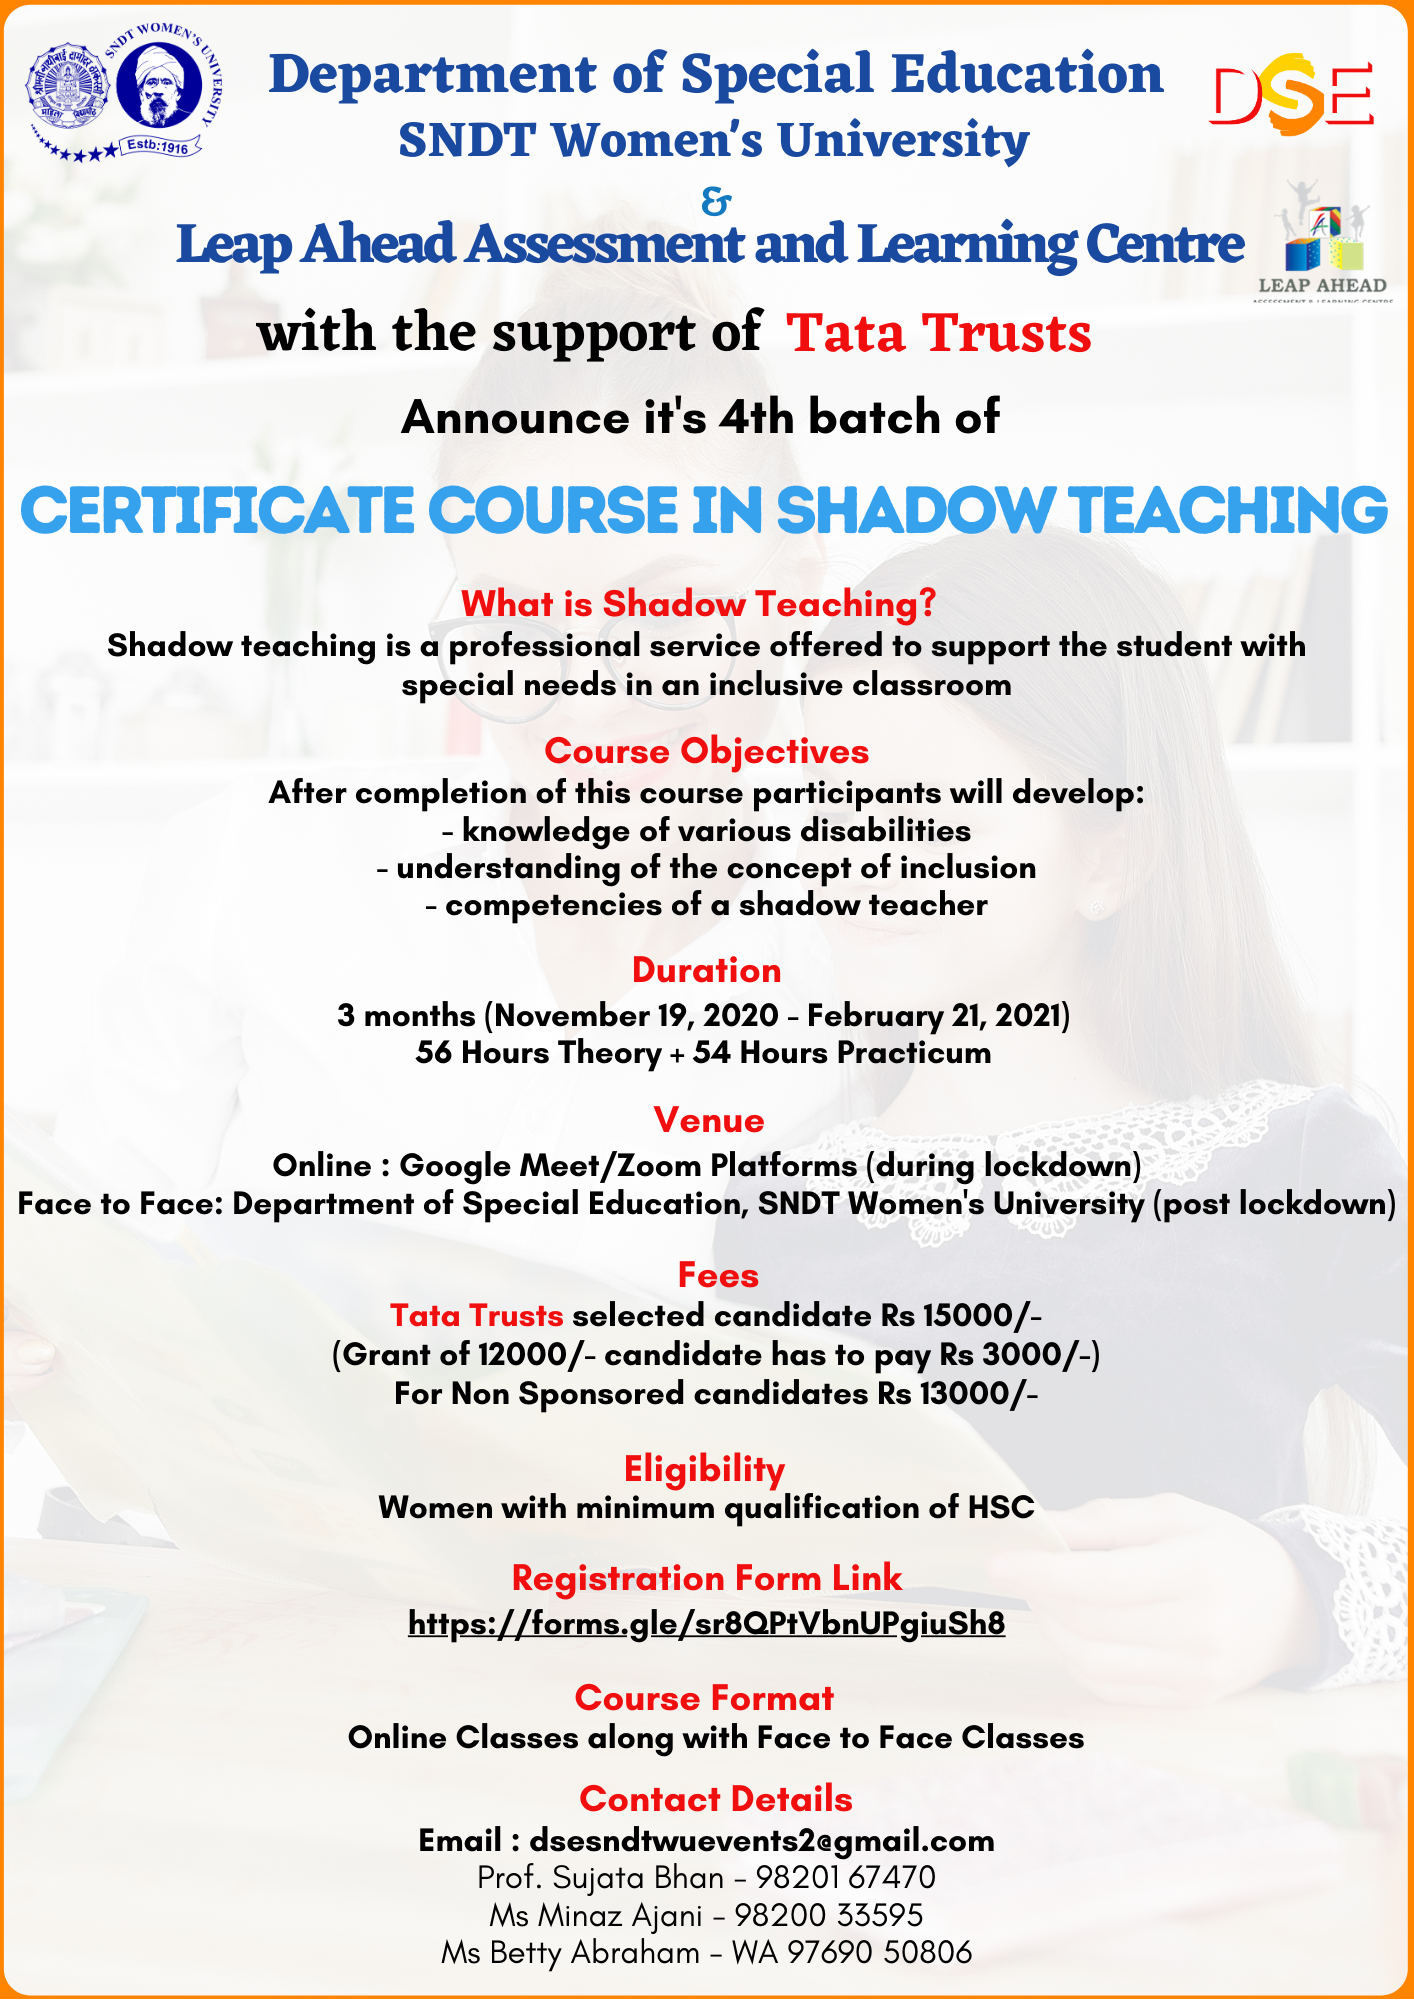 Inaugural Programme- 4th Batch of Certificate Course on Shadow Teaching